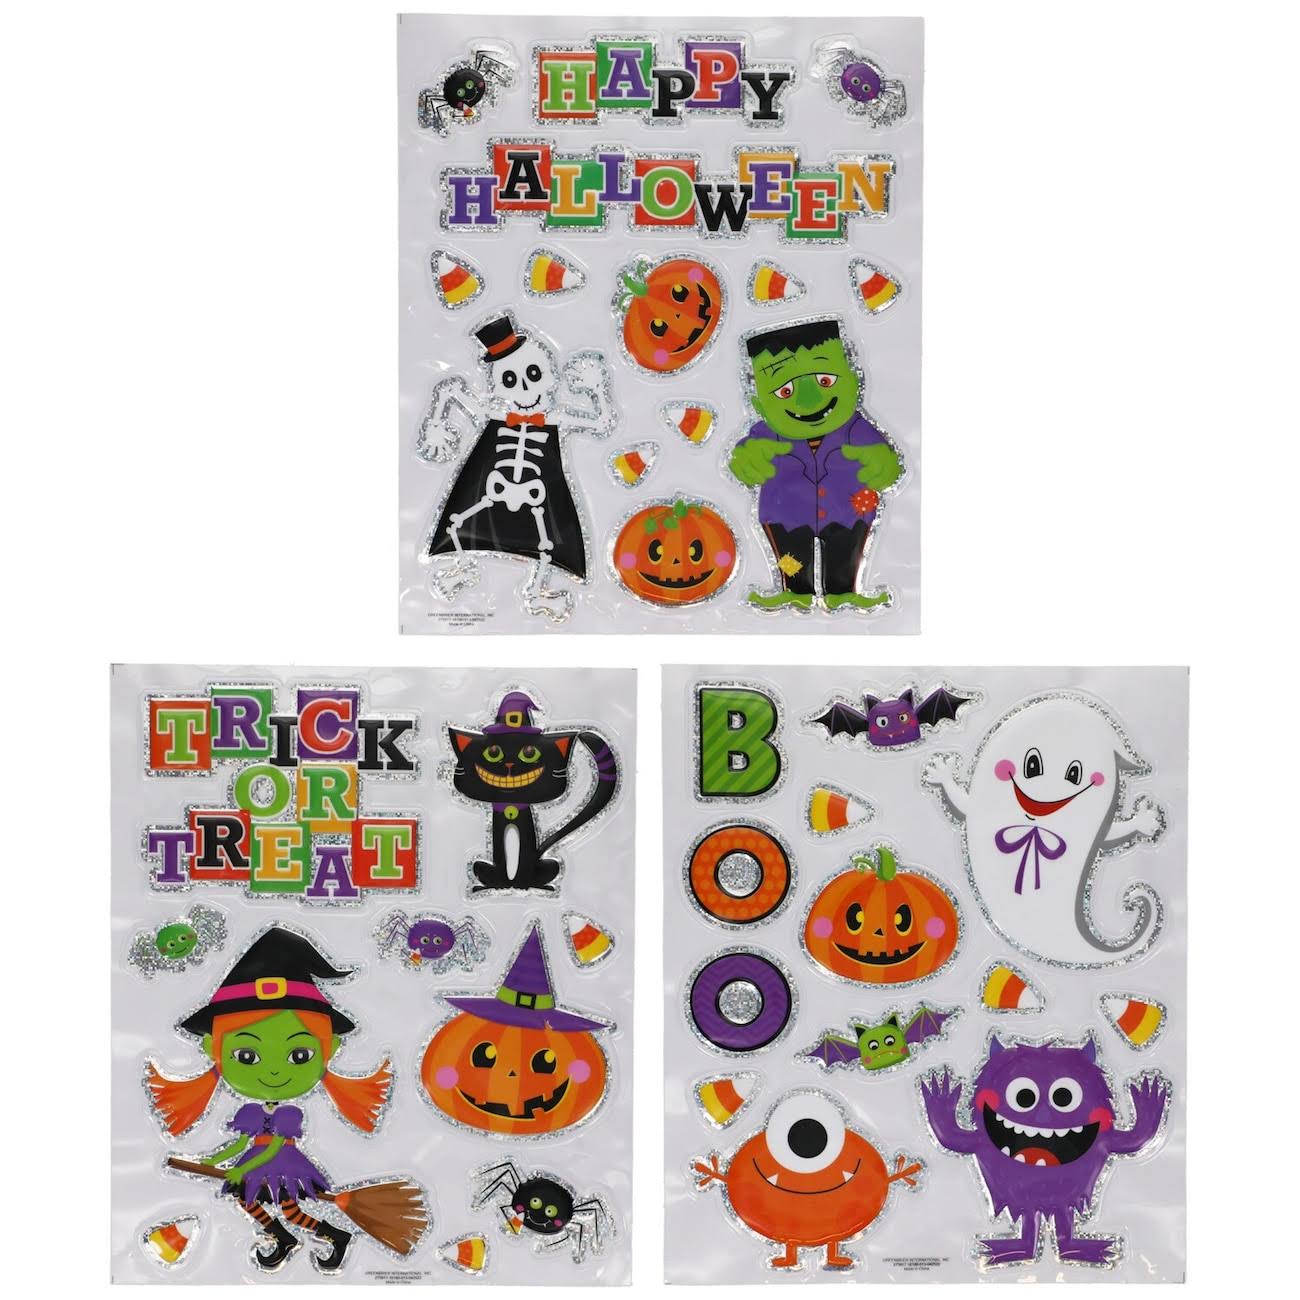 36 Embossed Holographic Halloween Window Decorations, 9.75 x 11.5-in. Packs at Dollar Tree